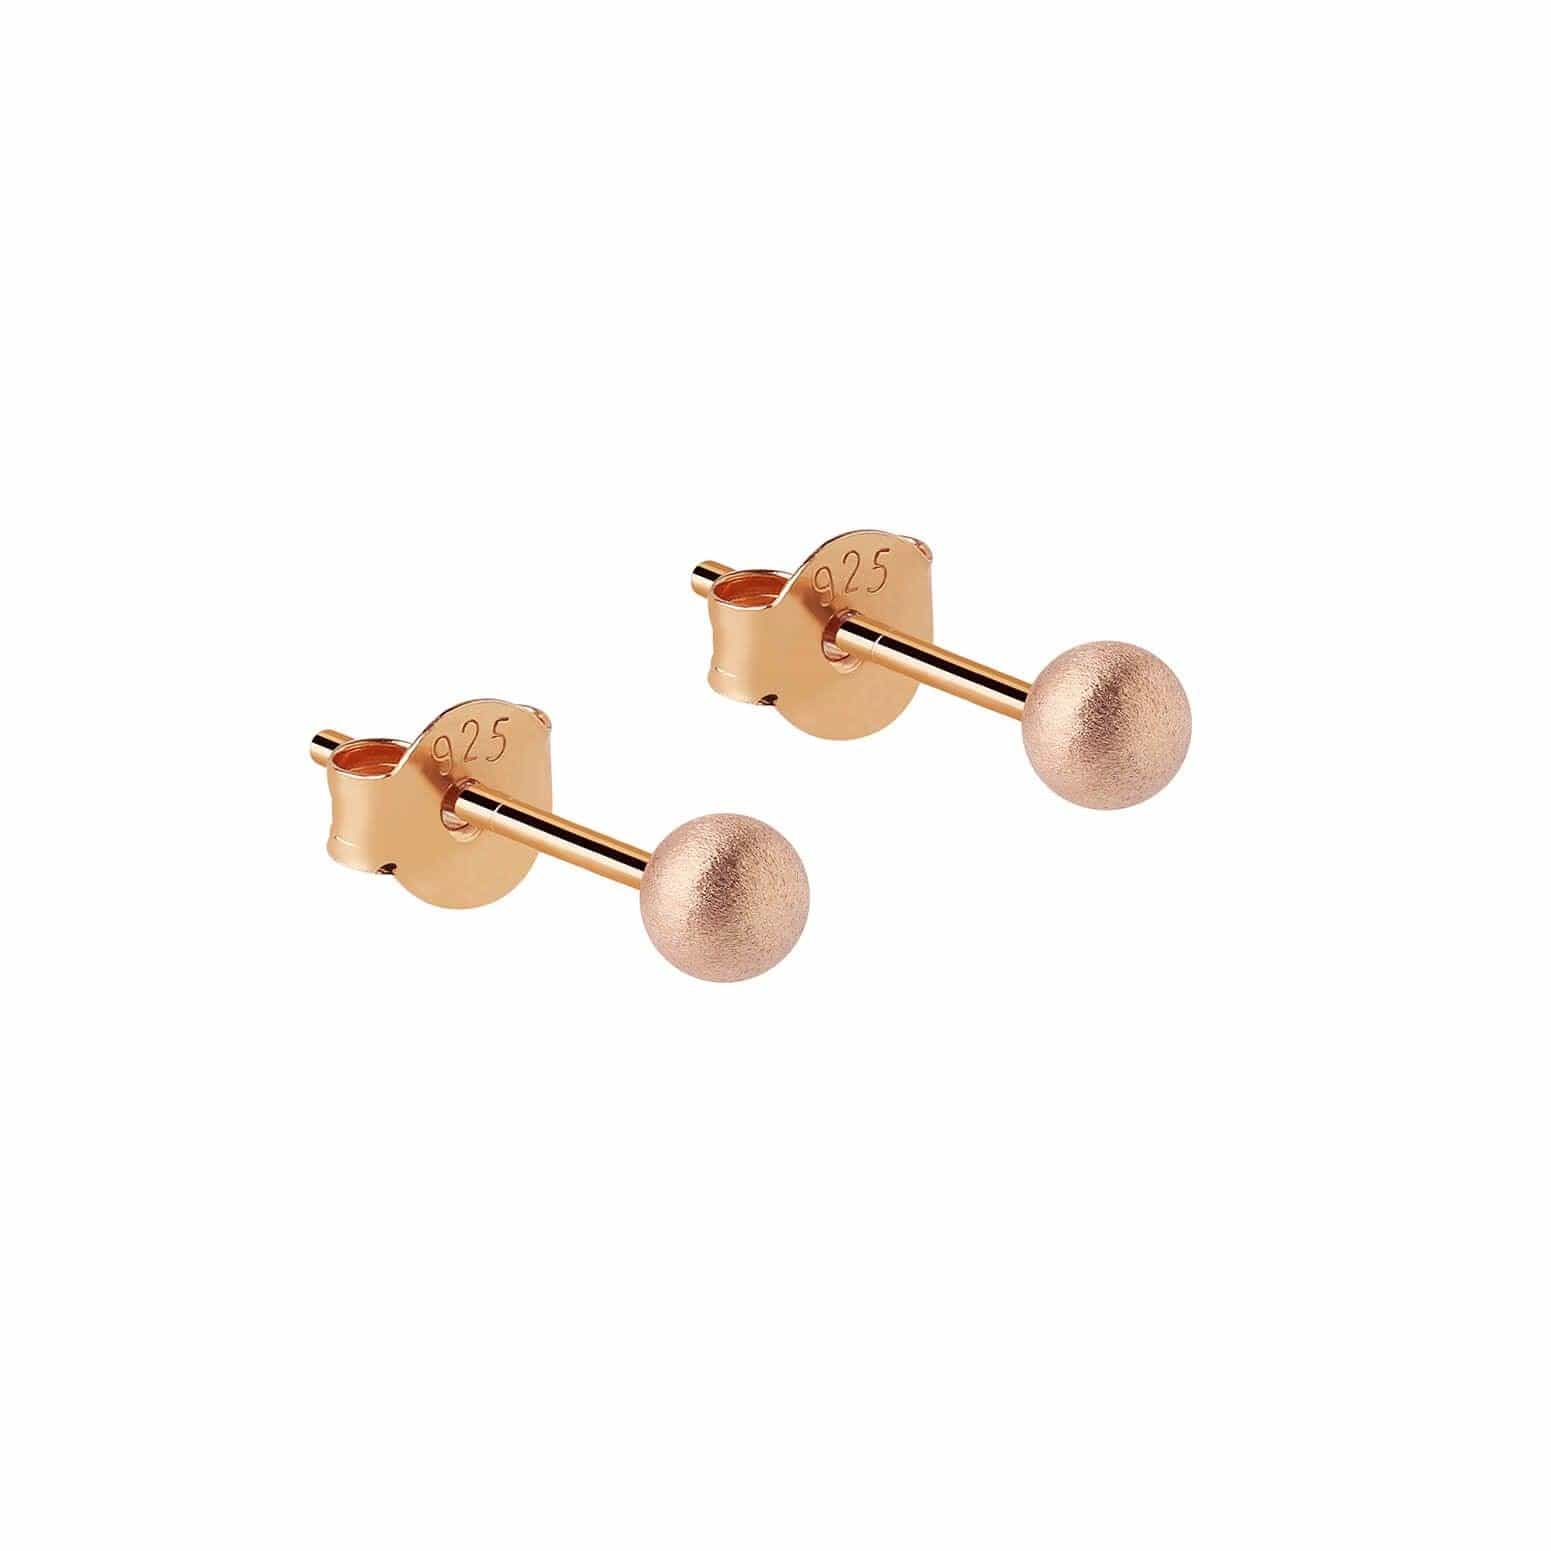 3mm classic stud earring matte rose gold plated